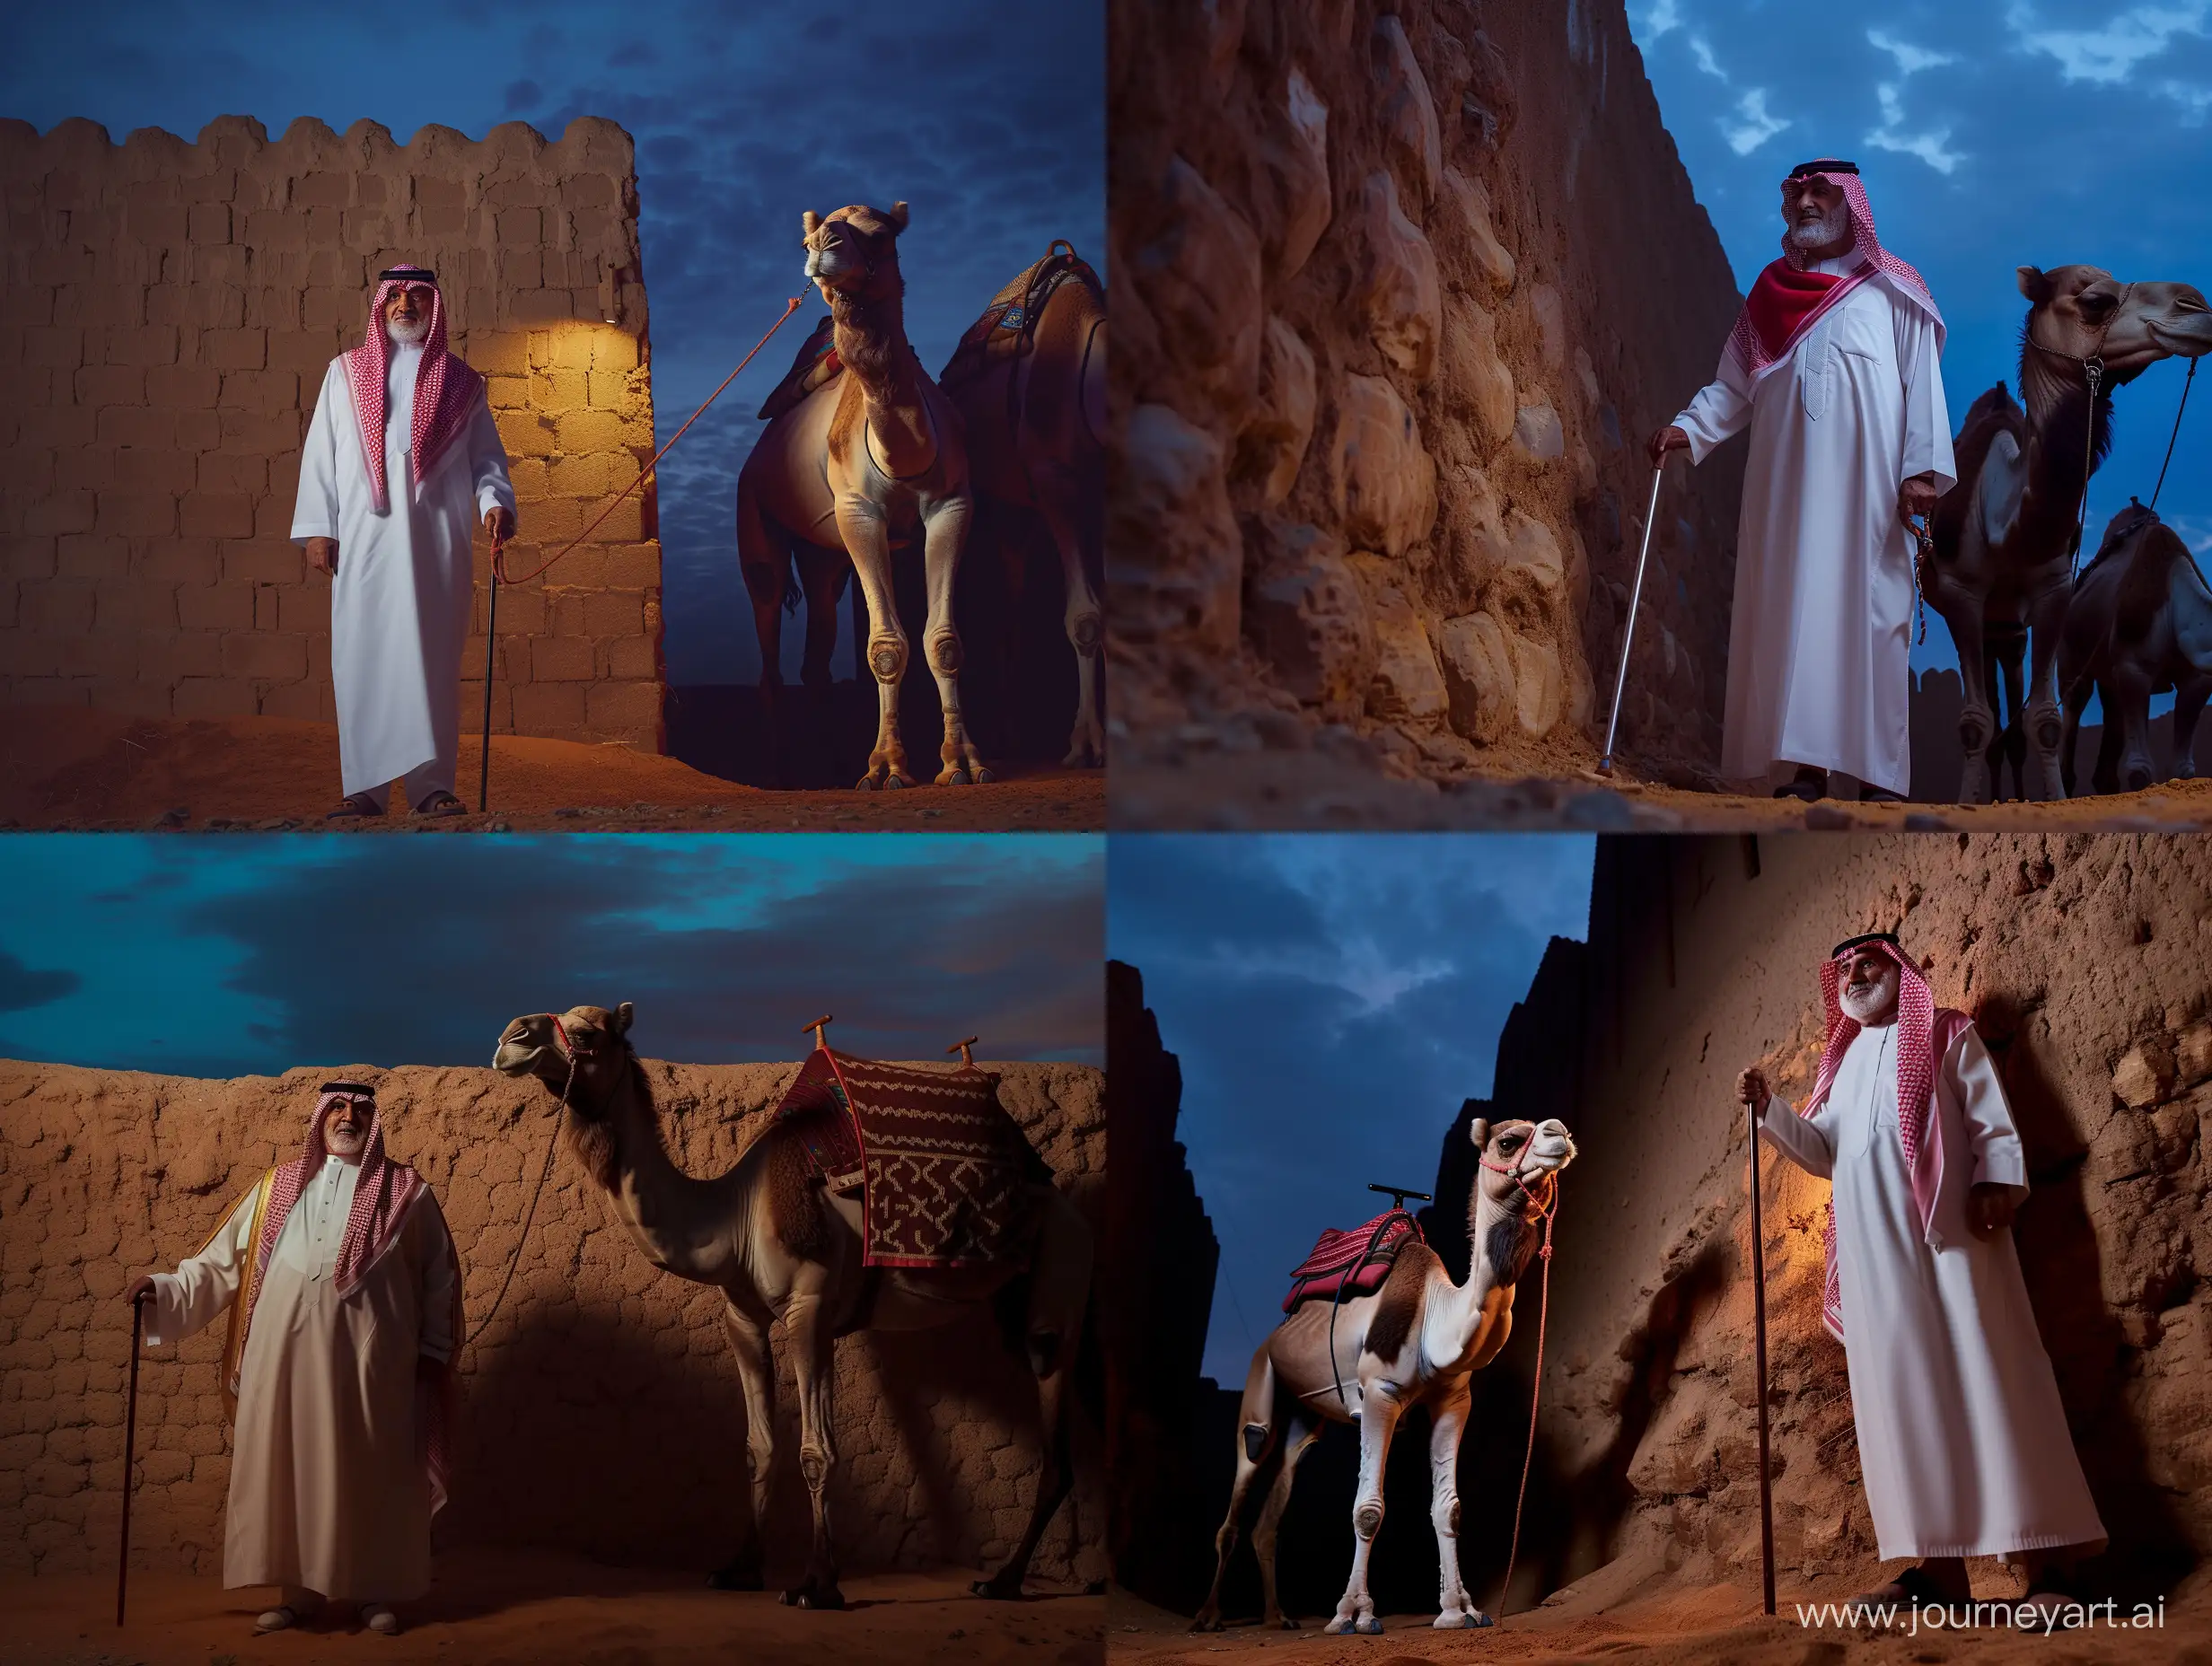 The opening image is of an old Saudi prince wearing the traditional white Saudi dress and a red shemagh, standing in front of a mud wall holding his cane next to him is a camel at night time and dim lighting, in a cinematic and dramatic style with shades of brown, and he seems confident of himself, the camera is at a low angle pointing upwards, and the sky is blue, And a full body shot